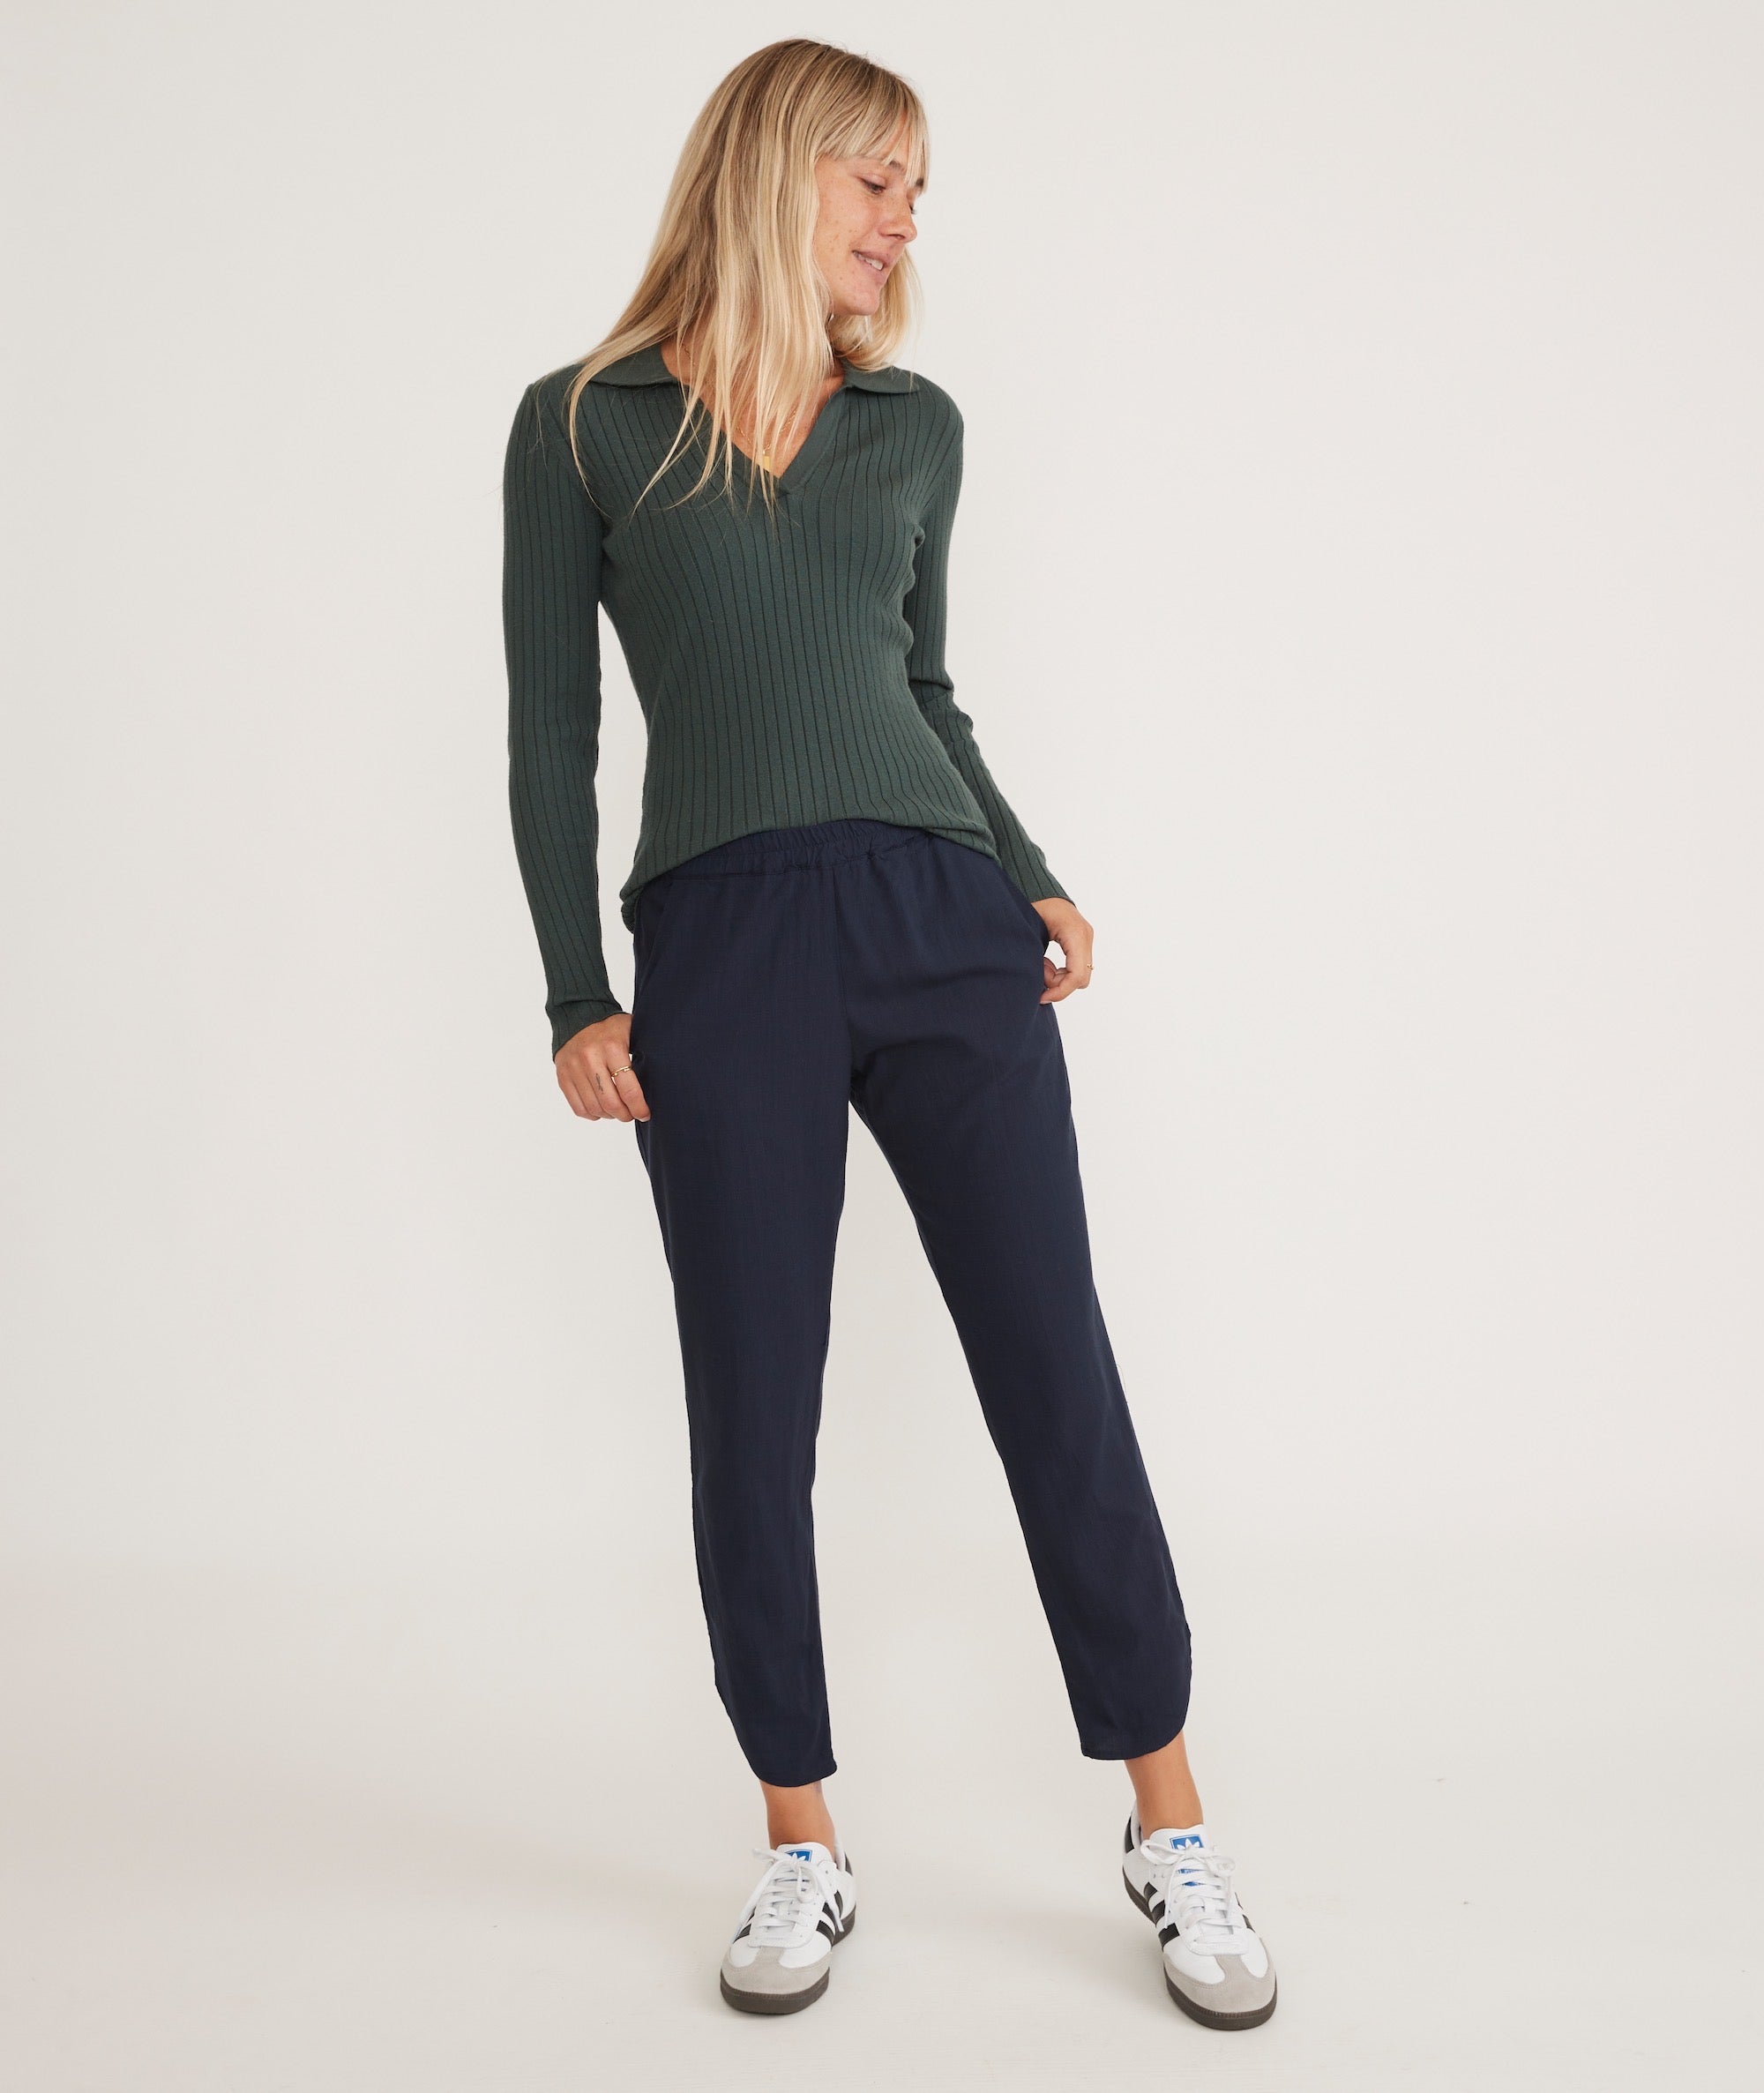 Petite Allison and Re-Spun Navy Pant in Marine – Layer Tall